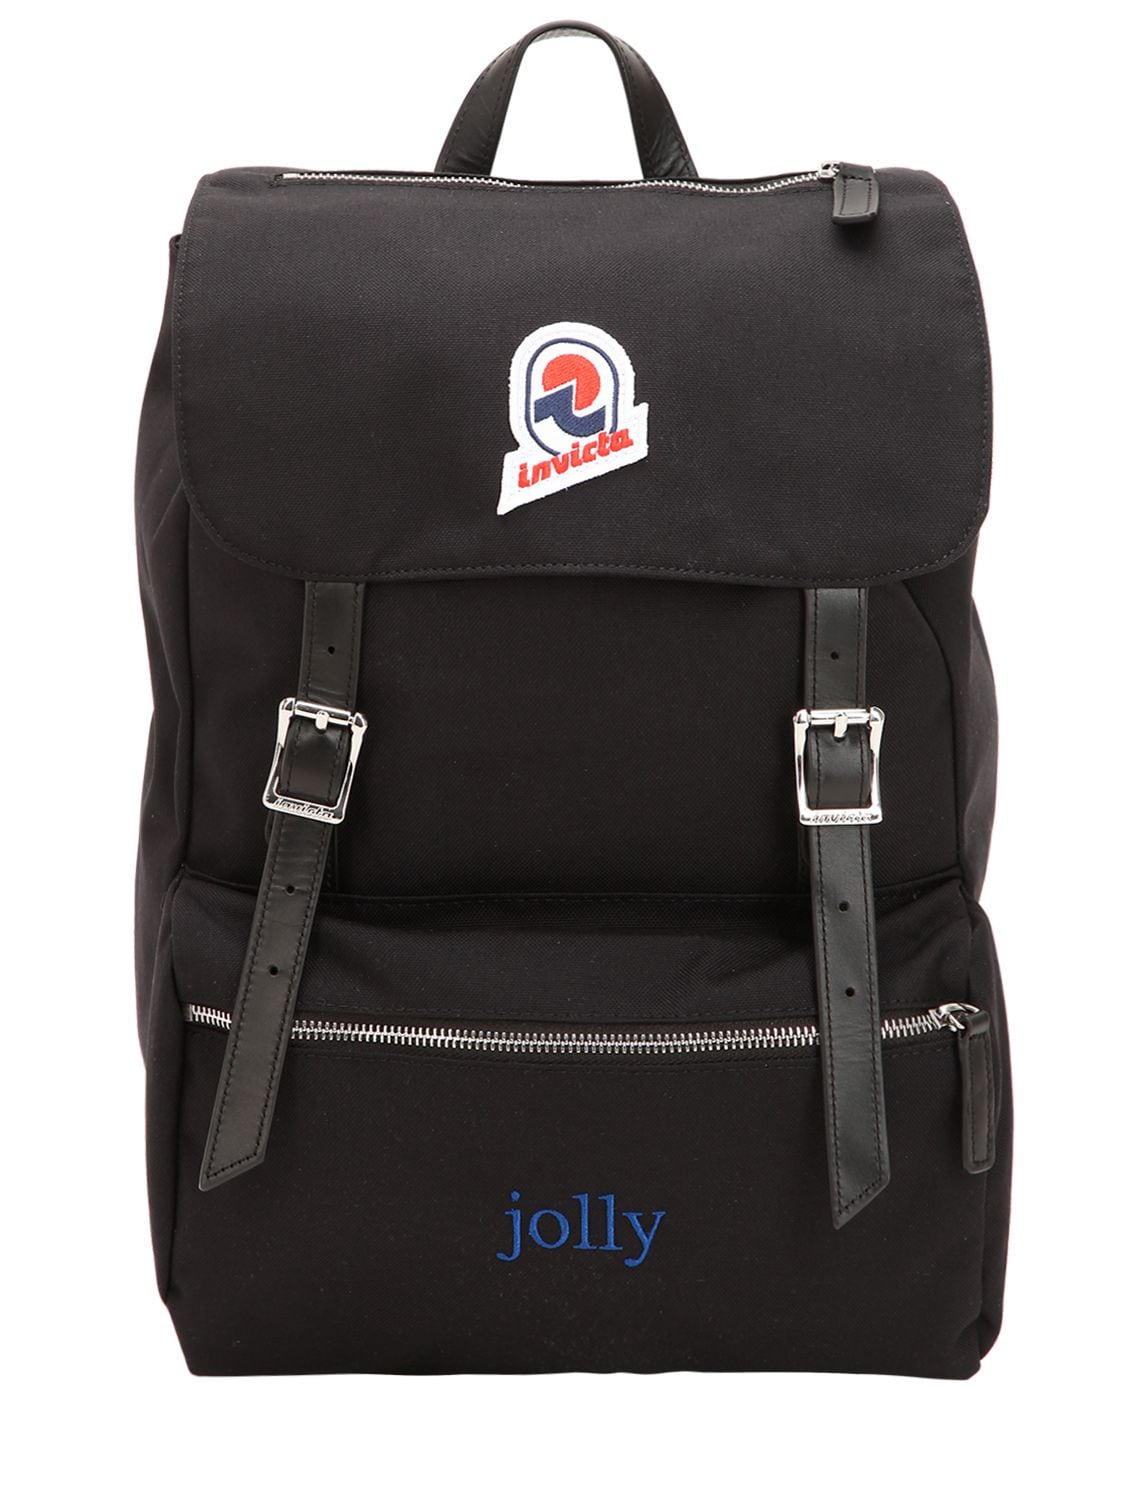 Invicta Jolly Backpack In Black